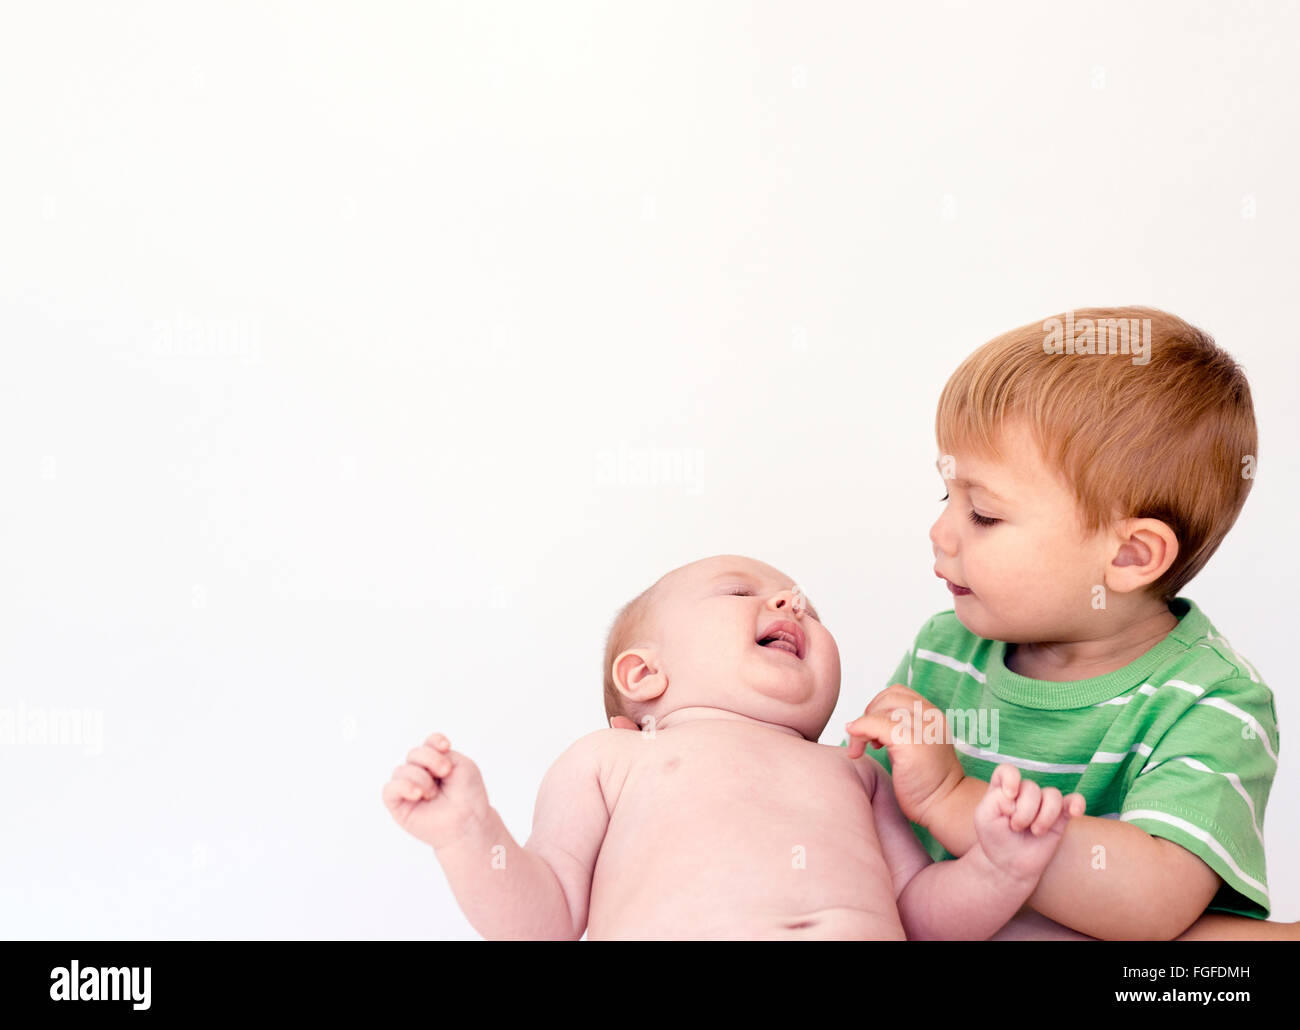 Young boy holding baby sister in arms Banque D'Images